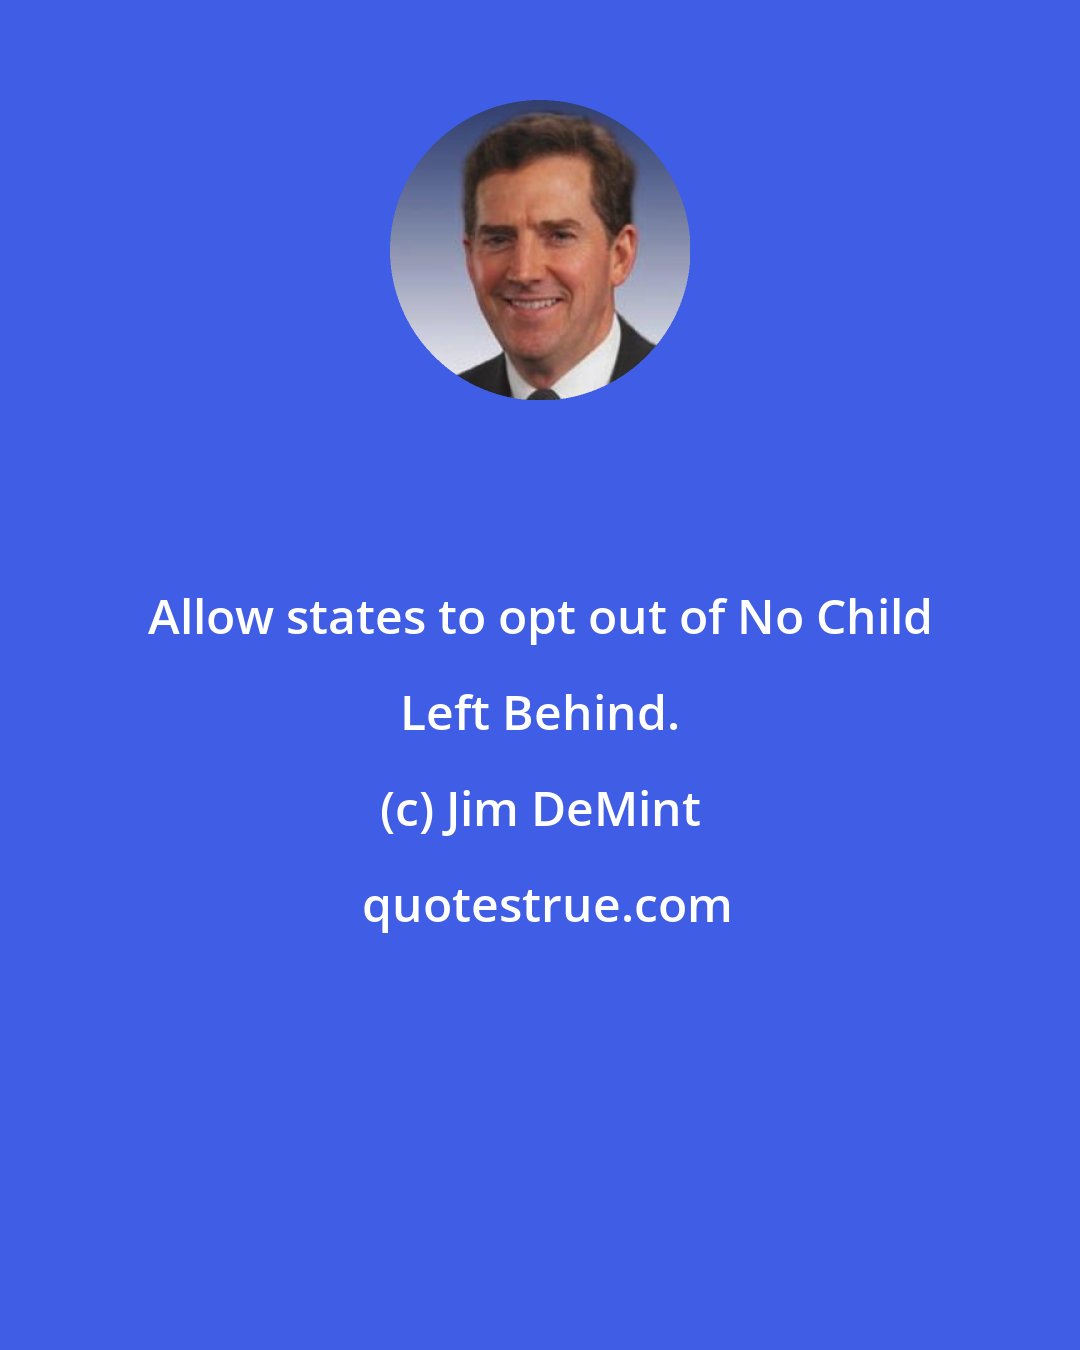 Jim DeMint: Allow states to opt out of No Child Left Behind.